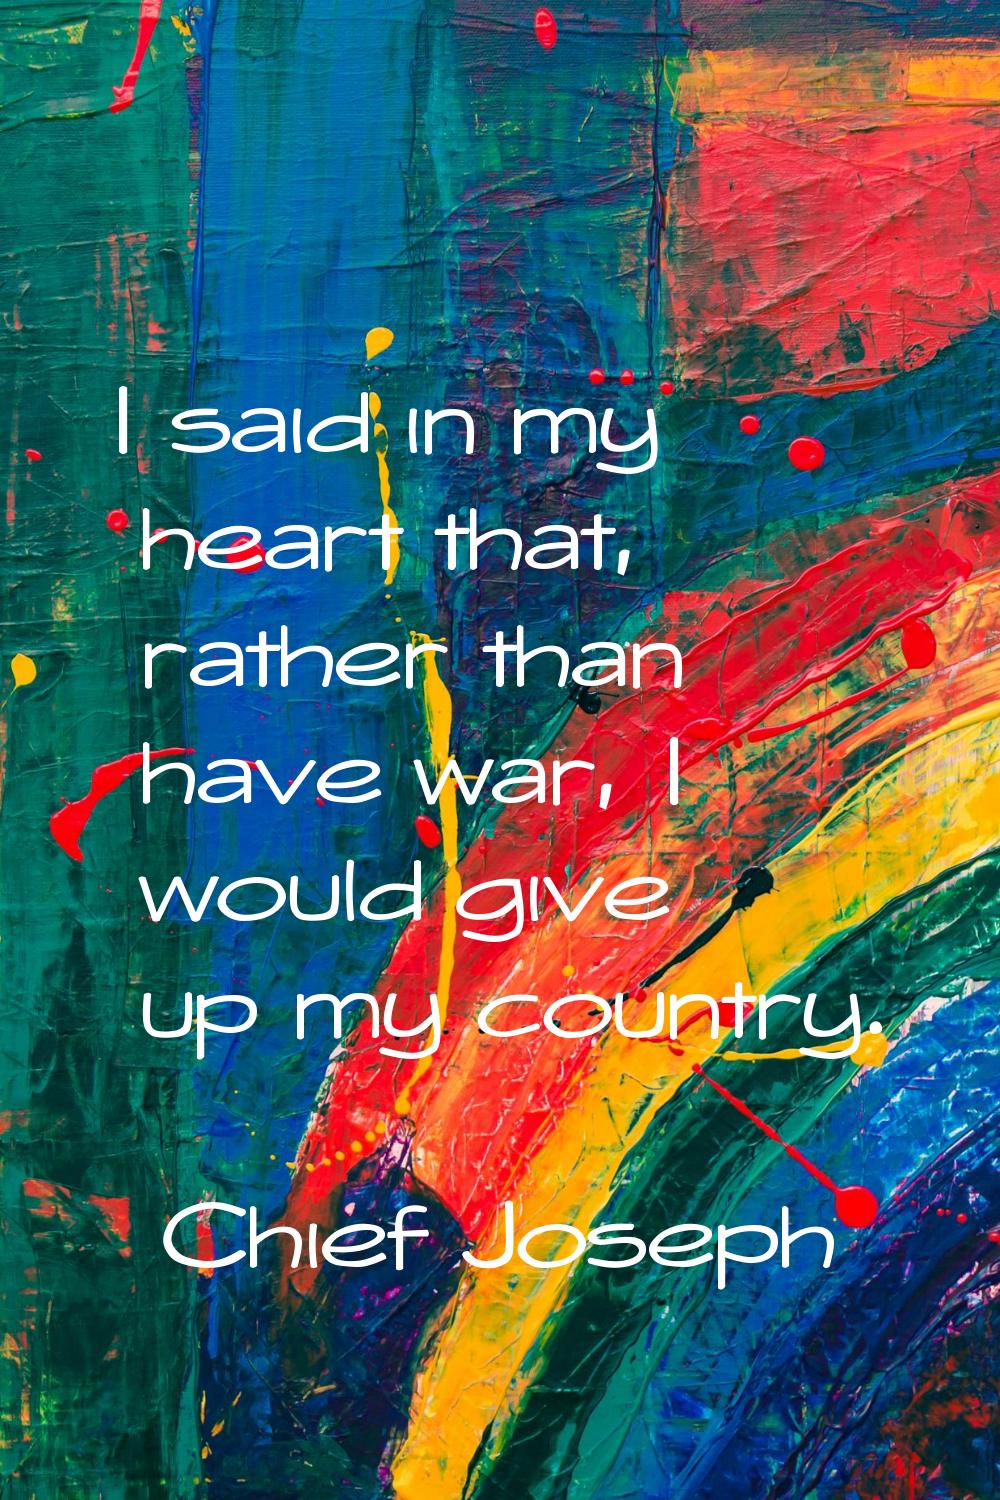 I said in my heart that, rather than have war, I would give up my country.